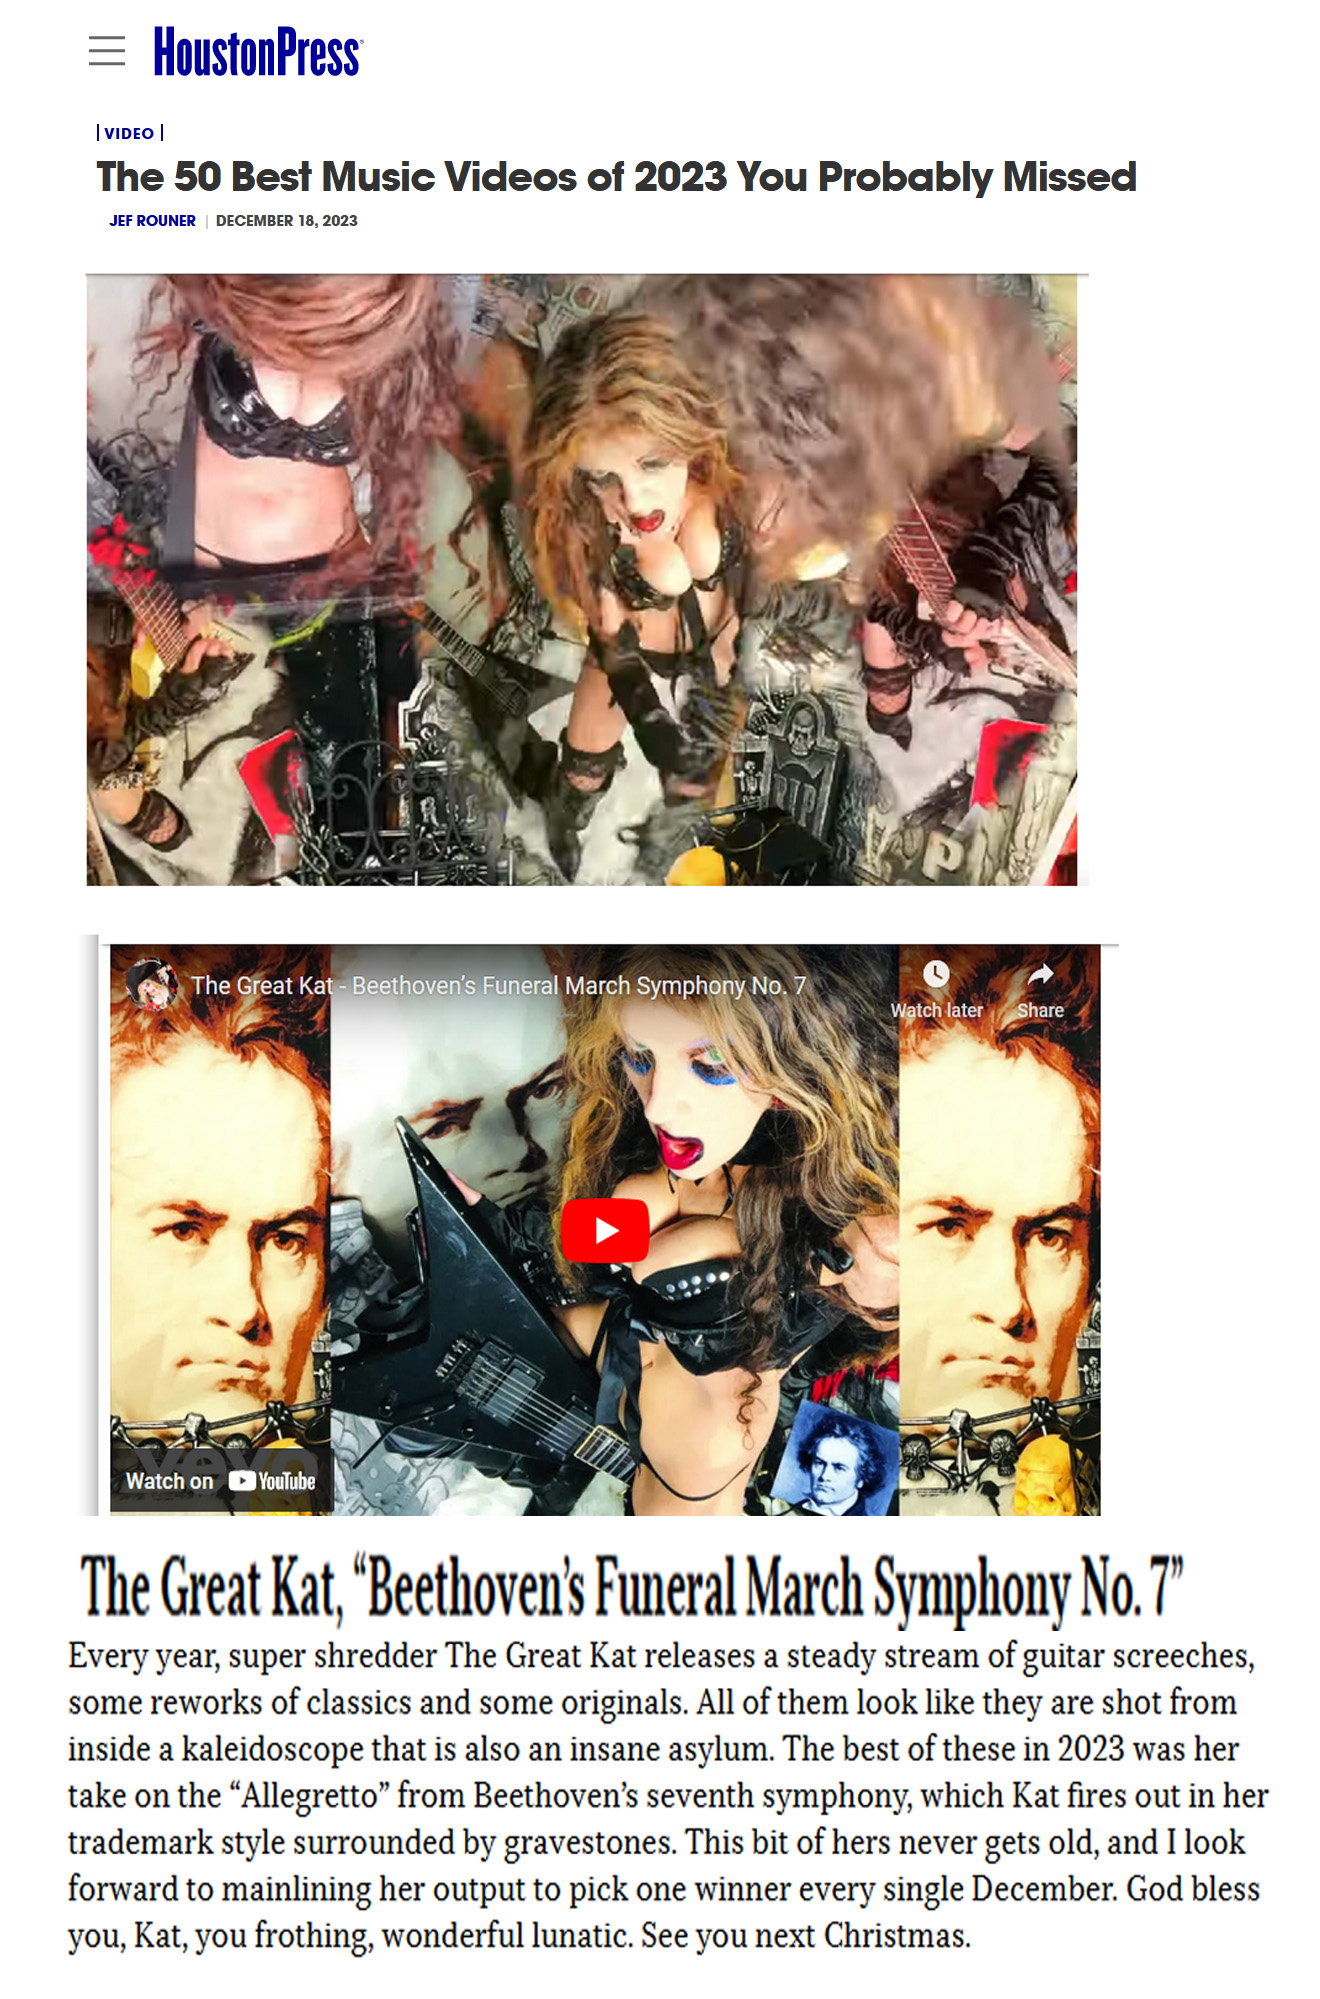 The Great Kat's "#Beethoven's Funeral March Symphony No. 7" Music Video Featured on New List: "The 50 Best Music Videos of 2023 You Probably Missed" in HOUSTON PRESS